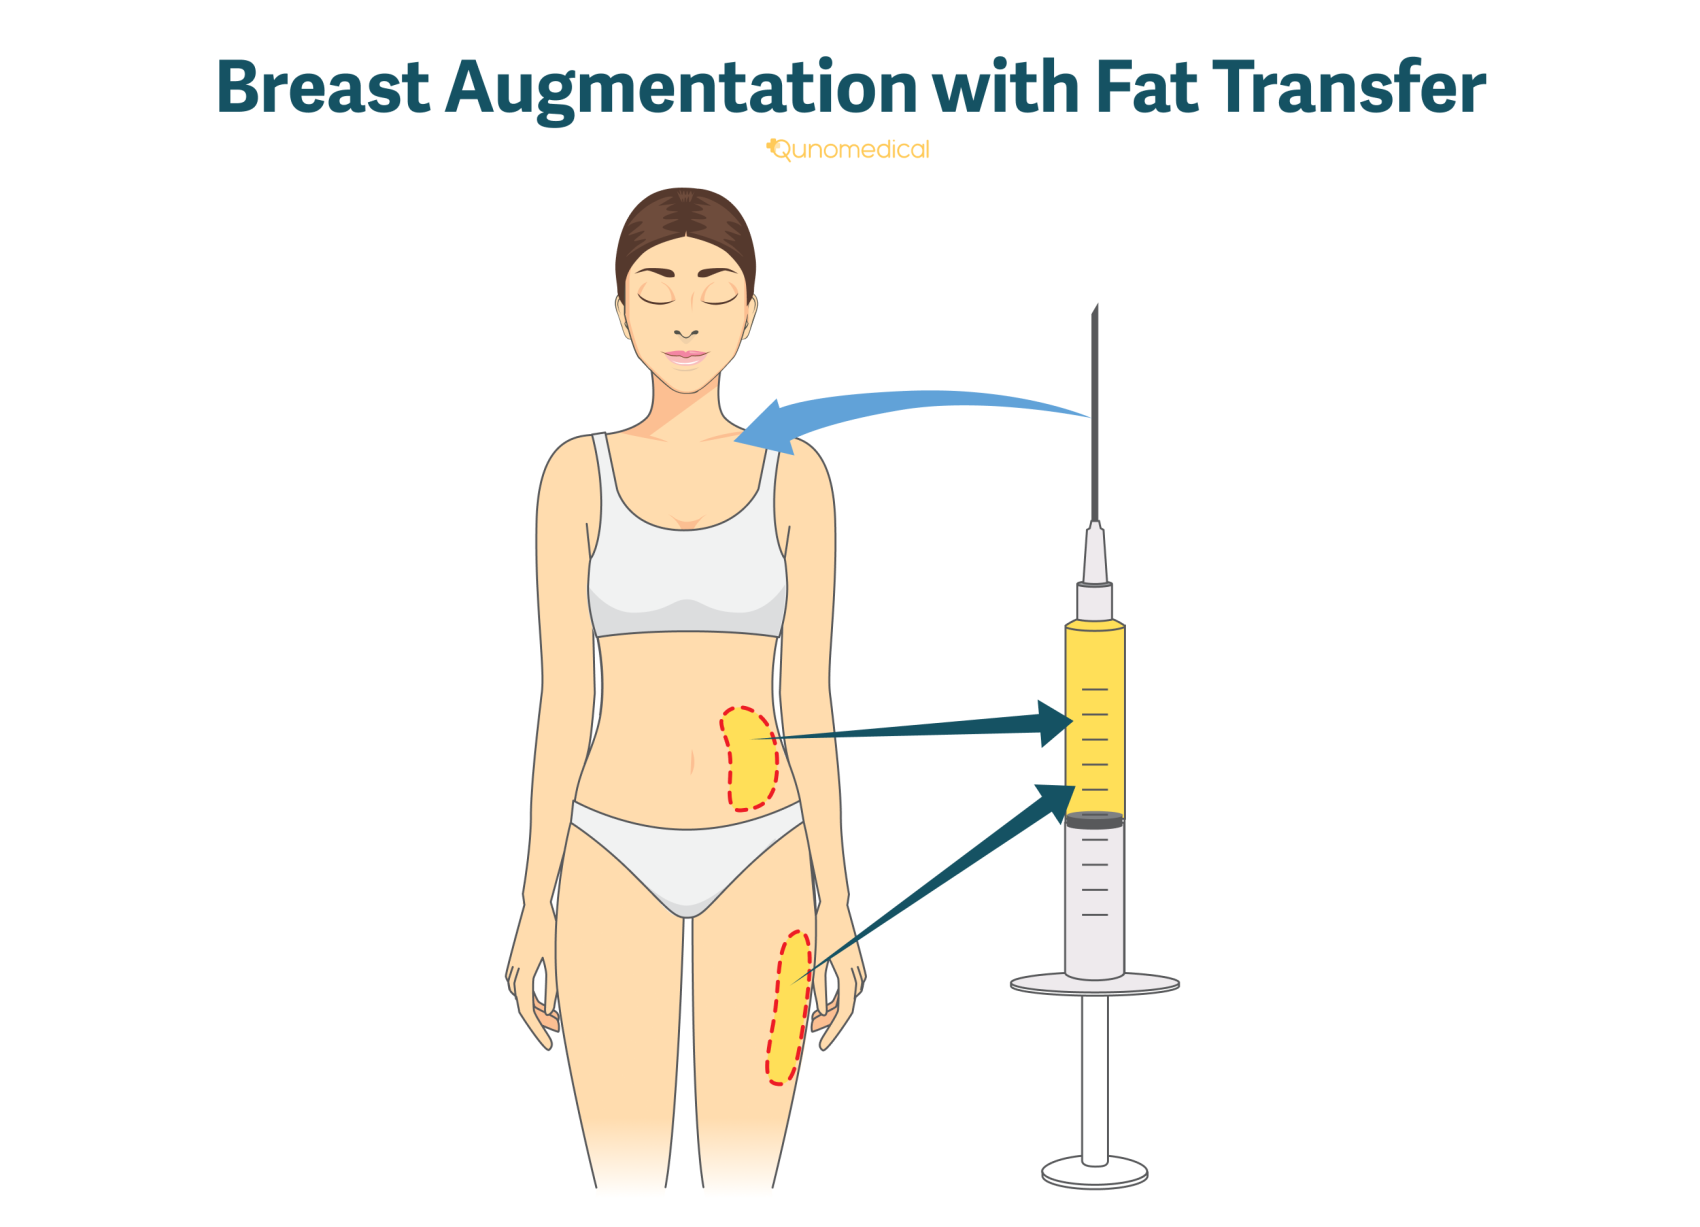 An illustration of how breast augmentation with fat transfer works.